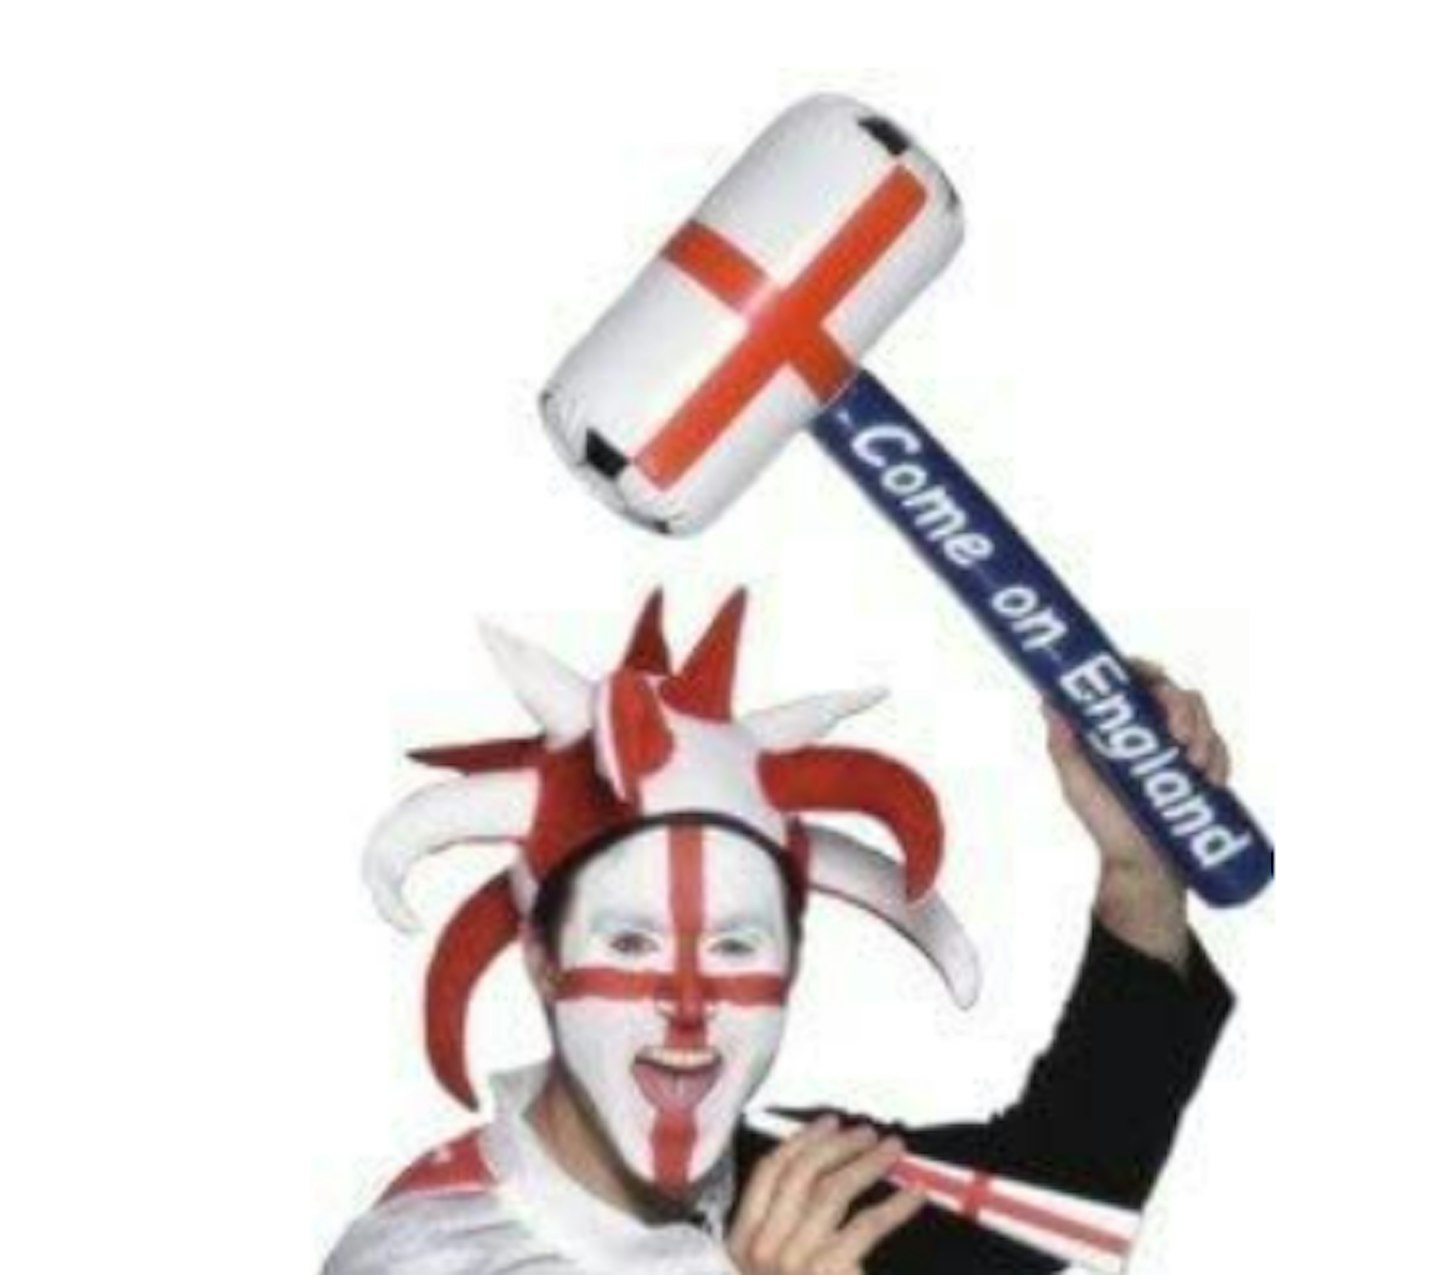 Inflatable 'COME ON ENGLAND!' Hammer for England